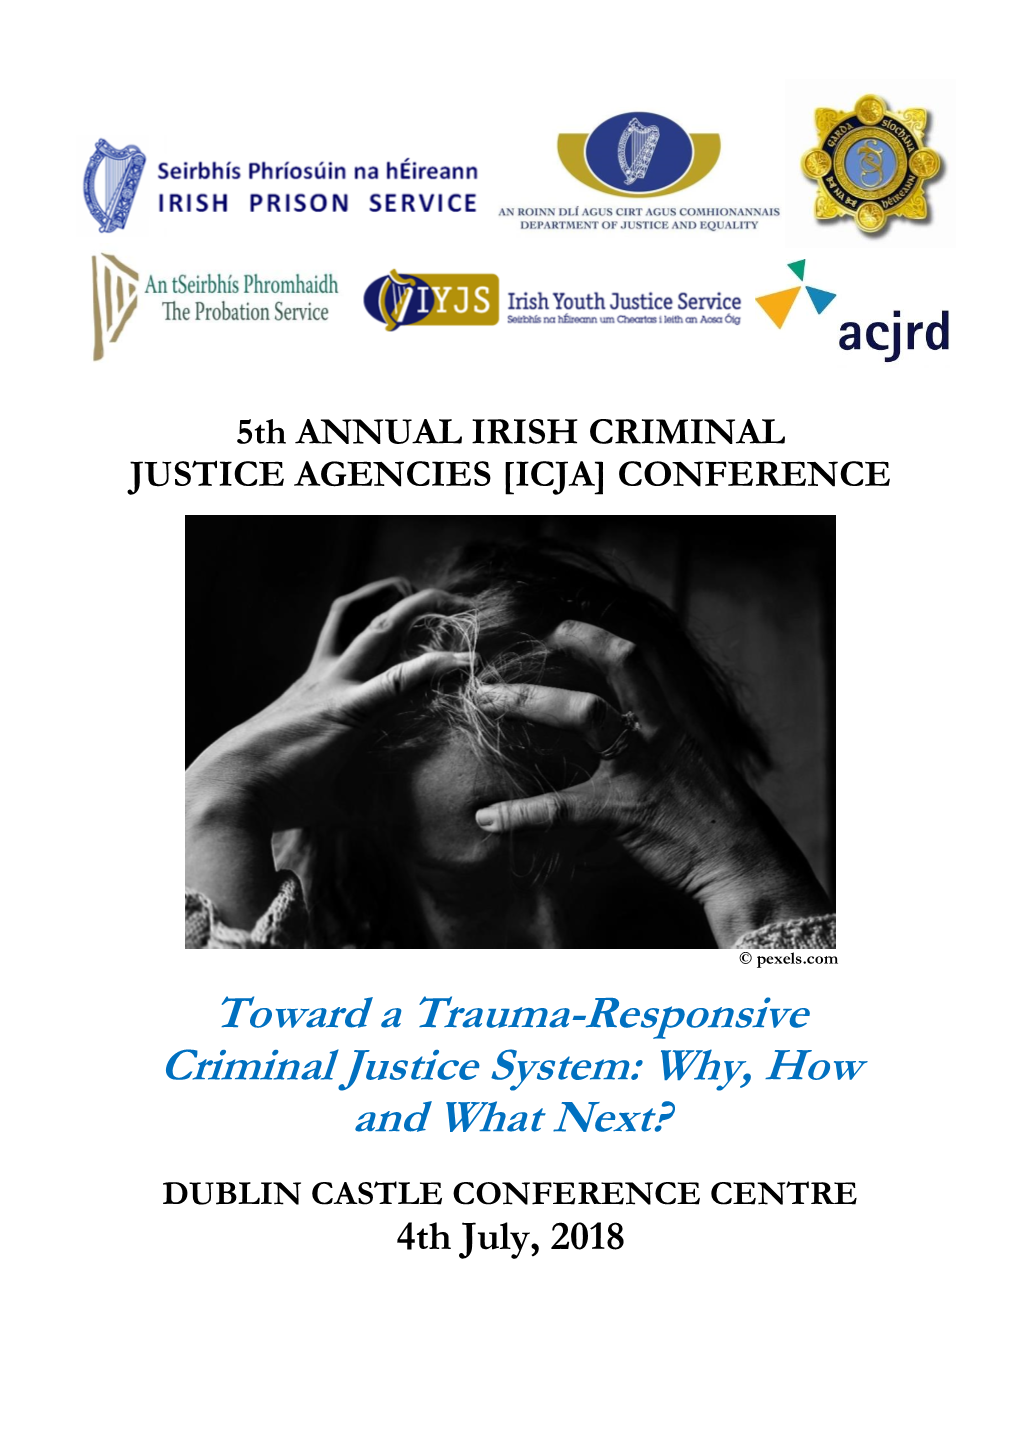 Toward a Trauma-Responsive Criminal Justice System: Why, How and What Next?